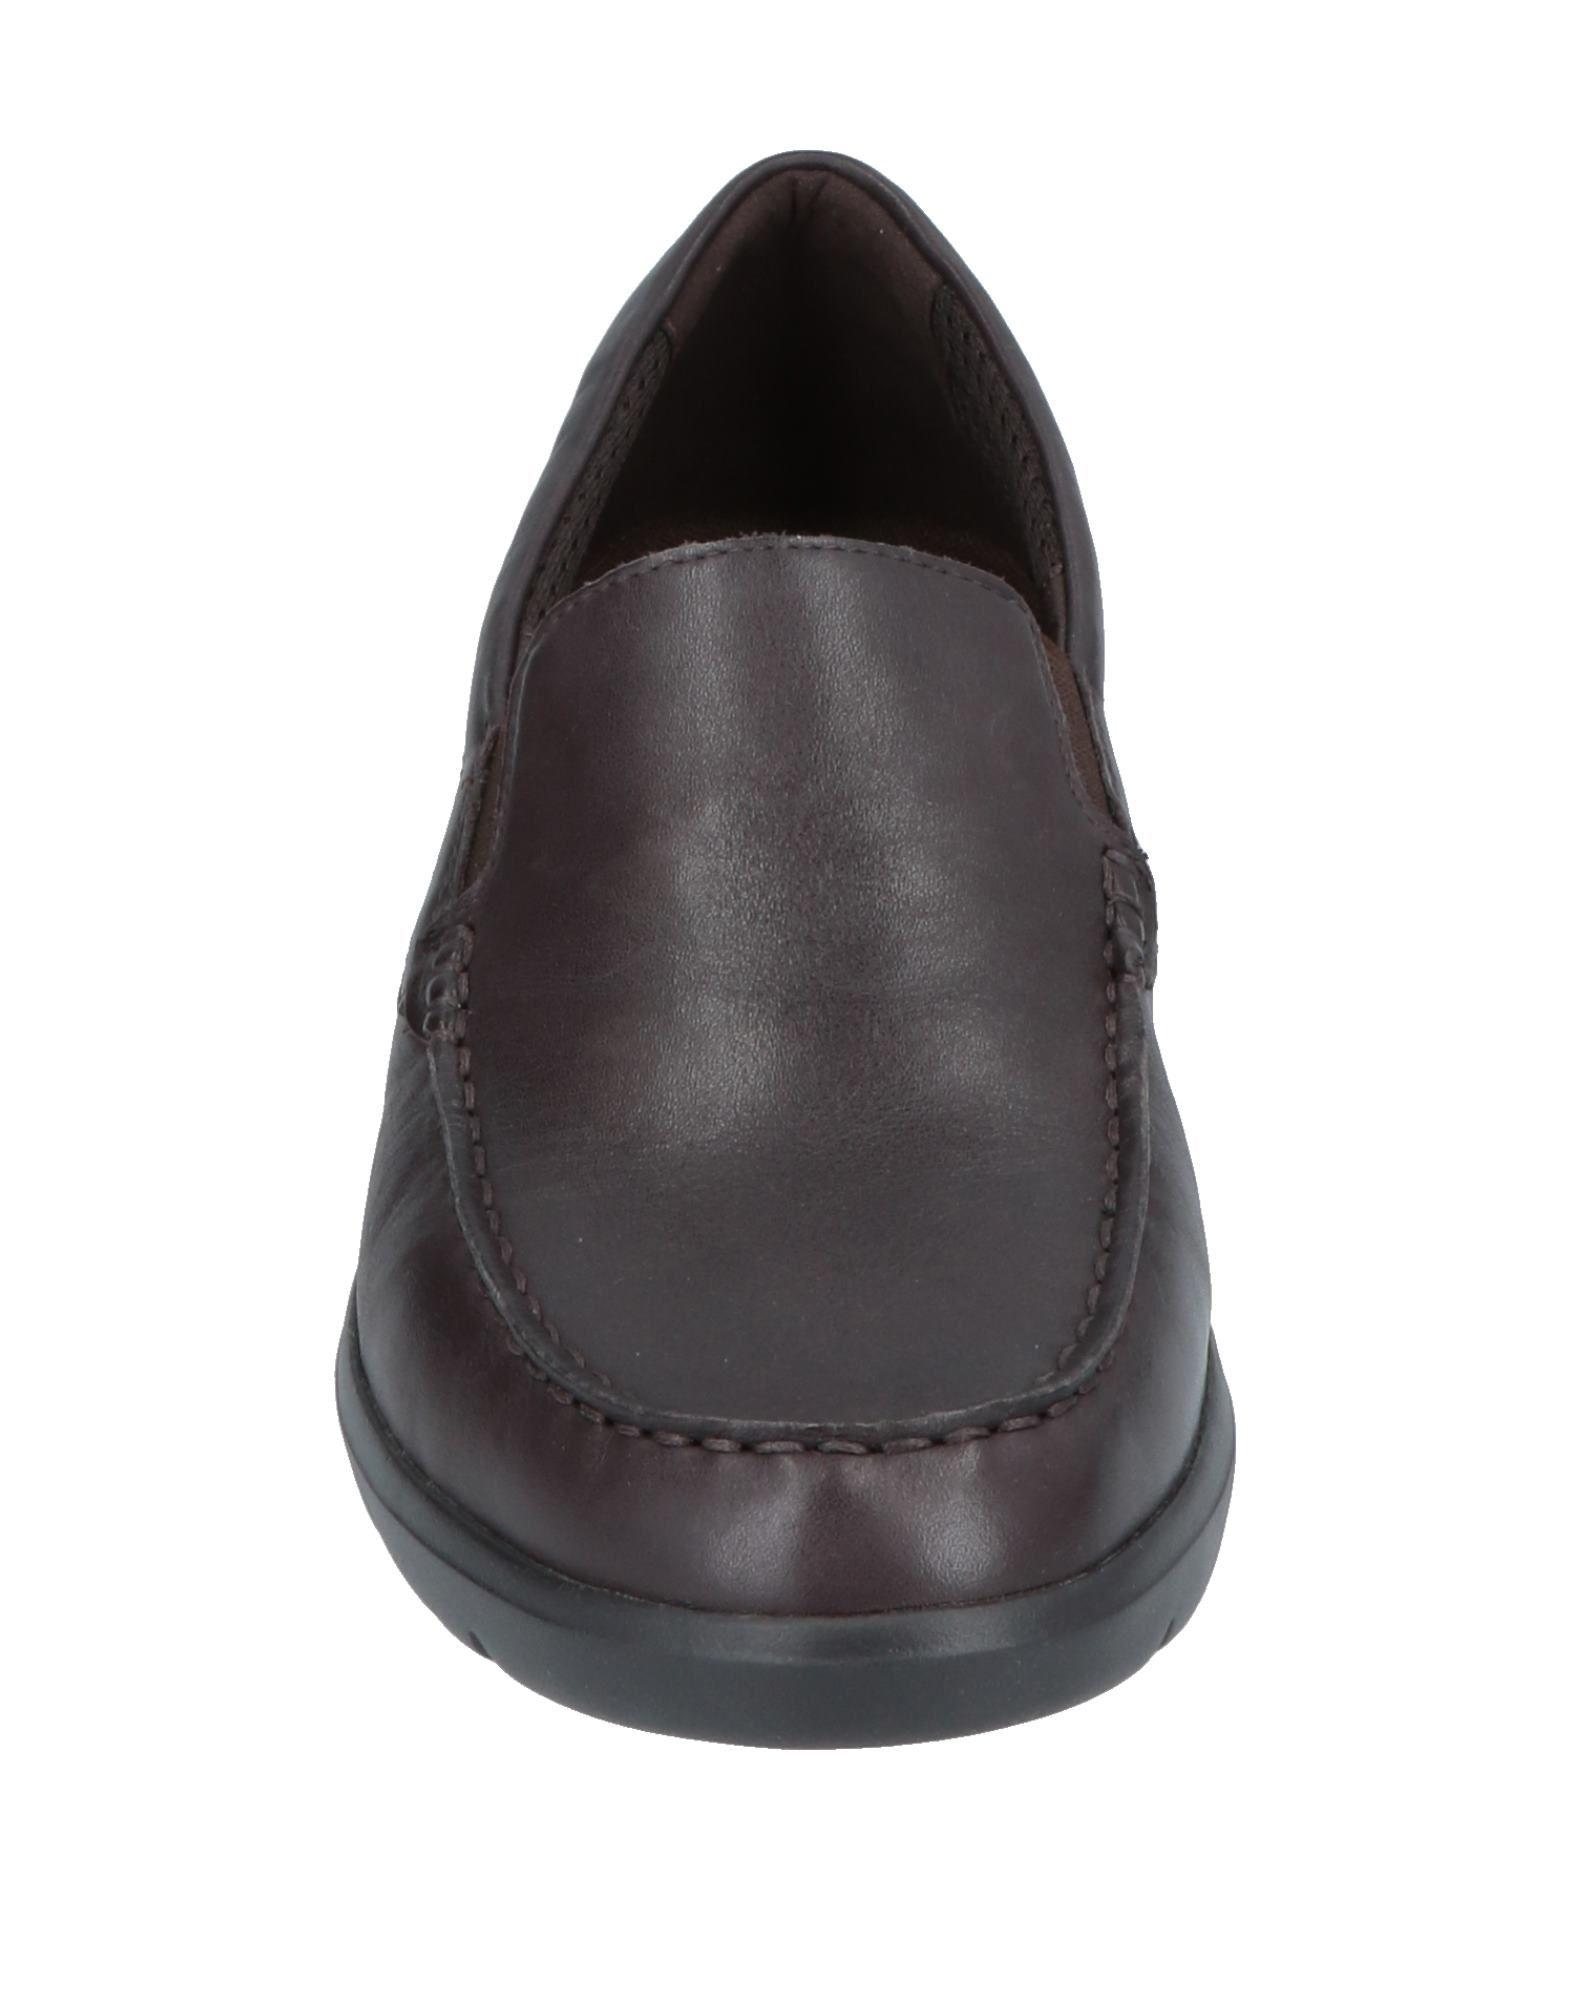 Geox Rubber Loafer in Dark Brown (Brown) for Men - Lyst